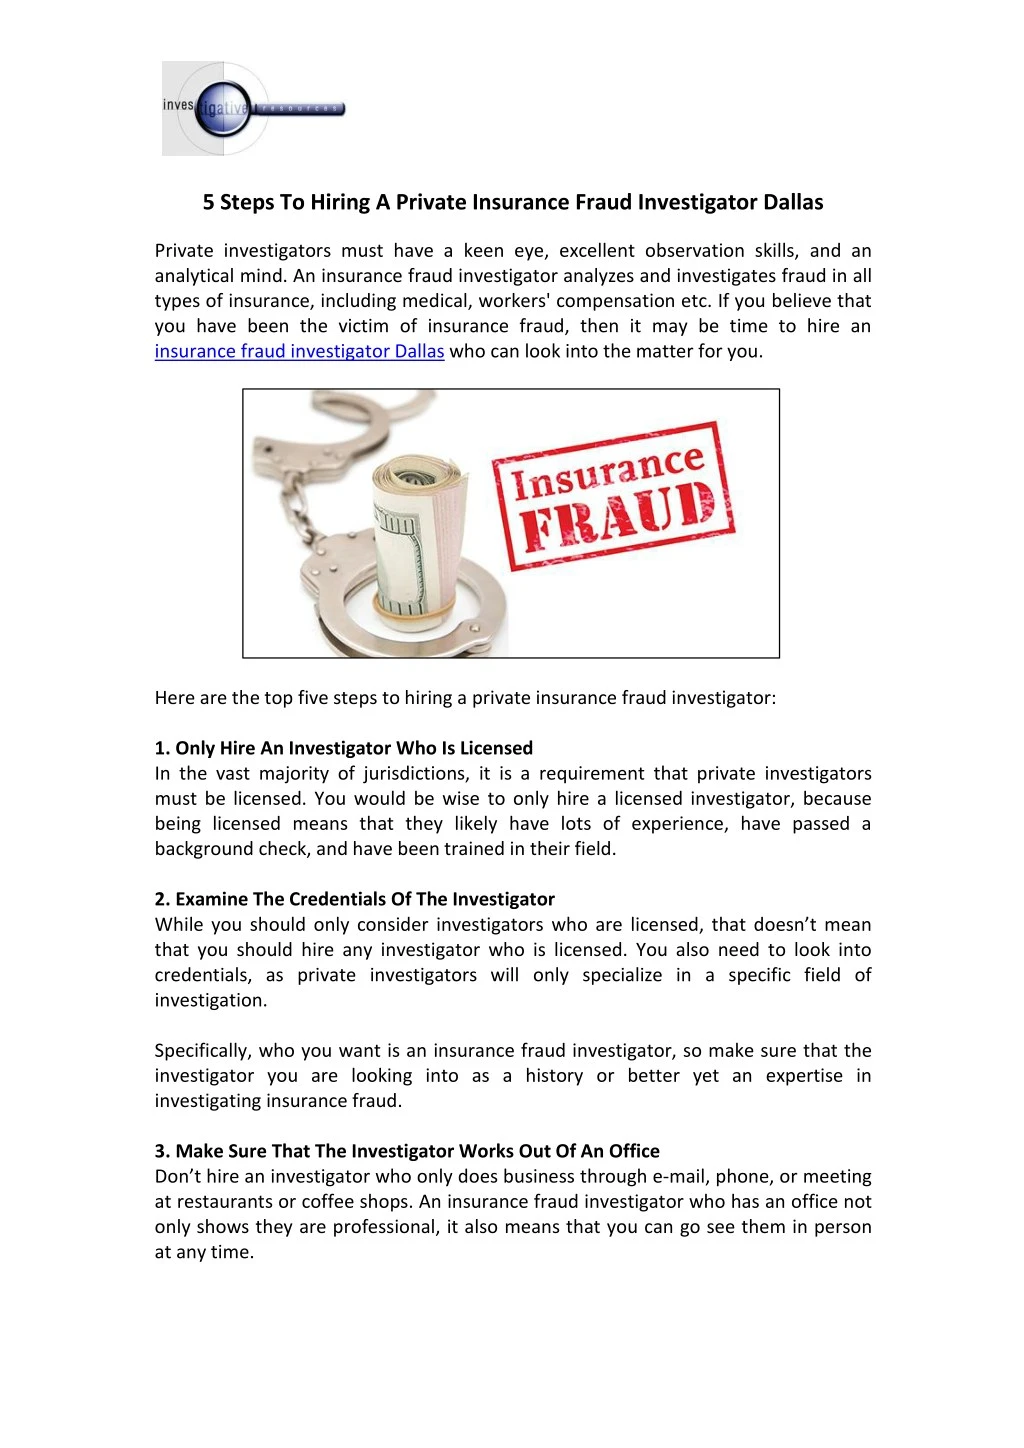 5 steps to hiring a private insurance fraud